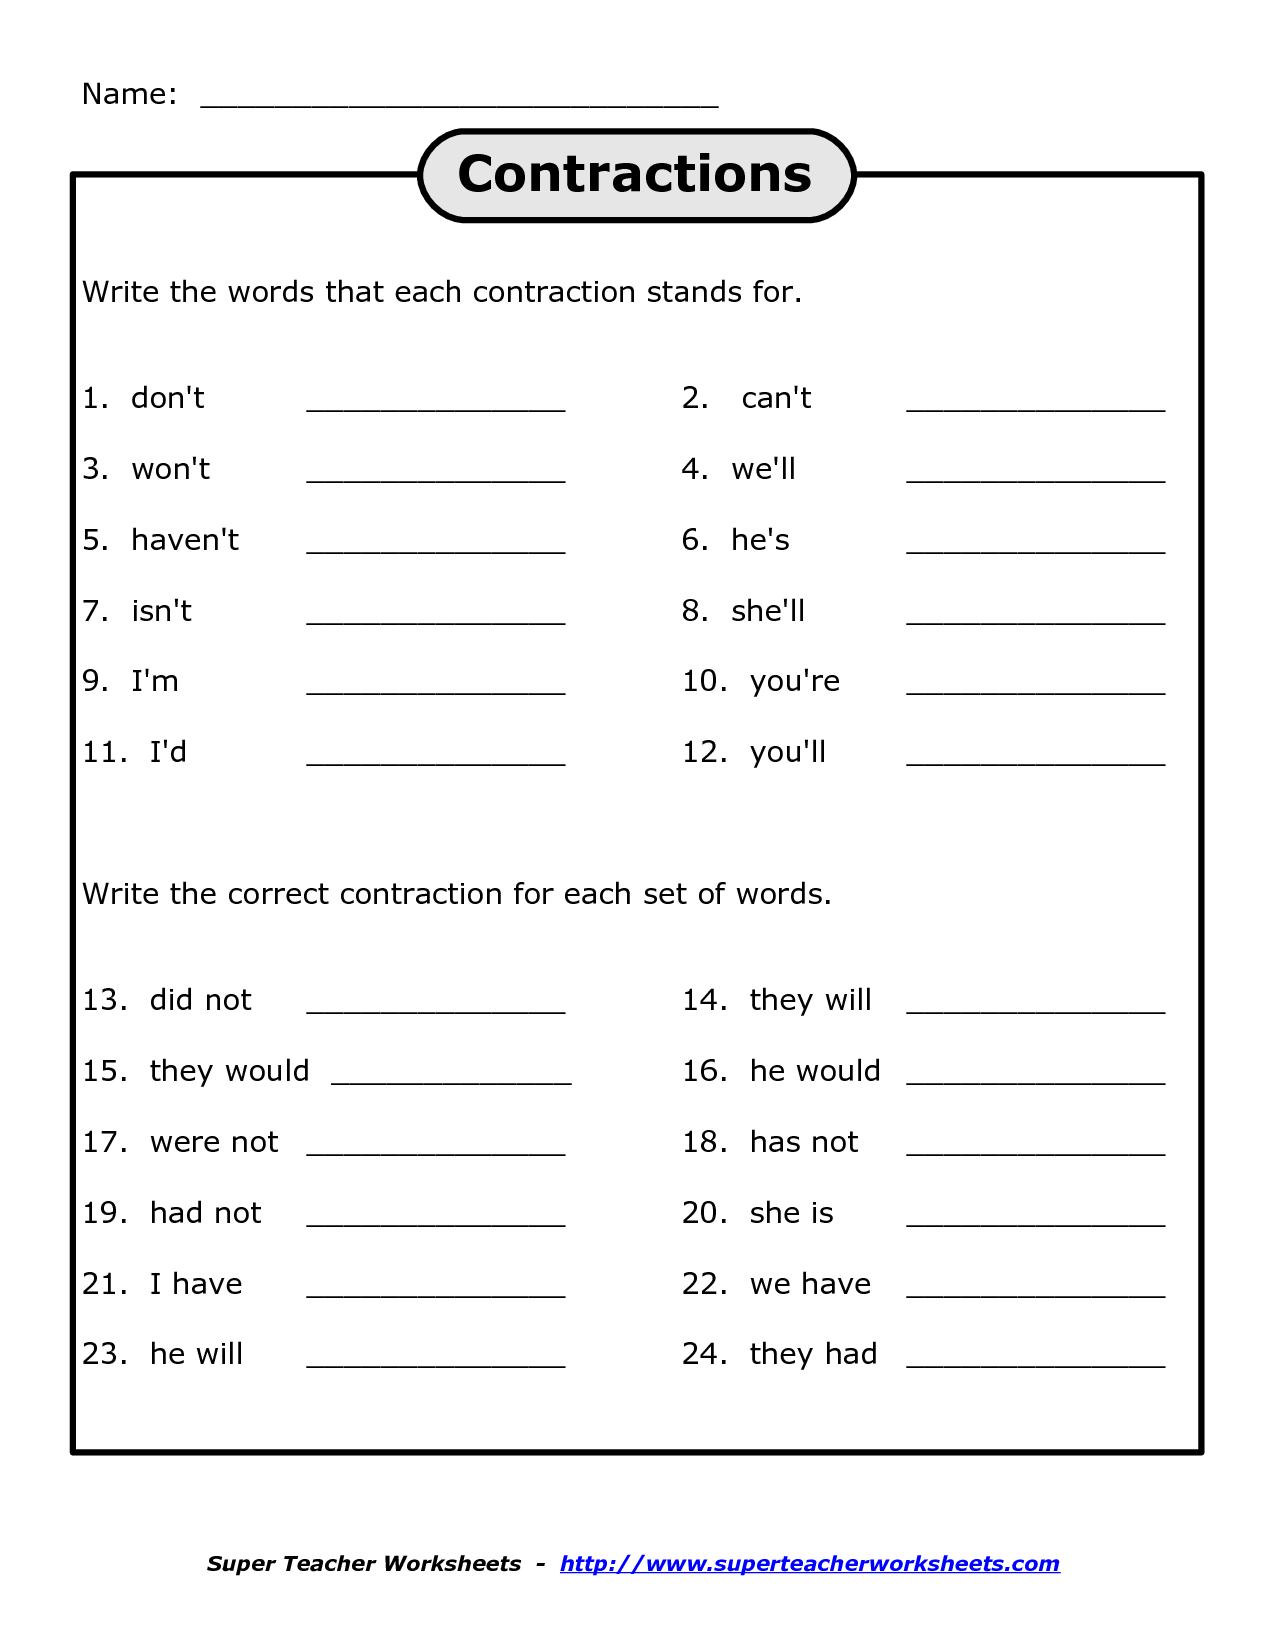 12-best-images-of-contractions-using-not-worksheets-contractions-worksheet-contraction